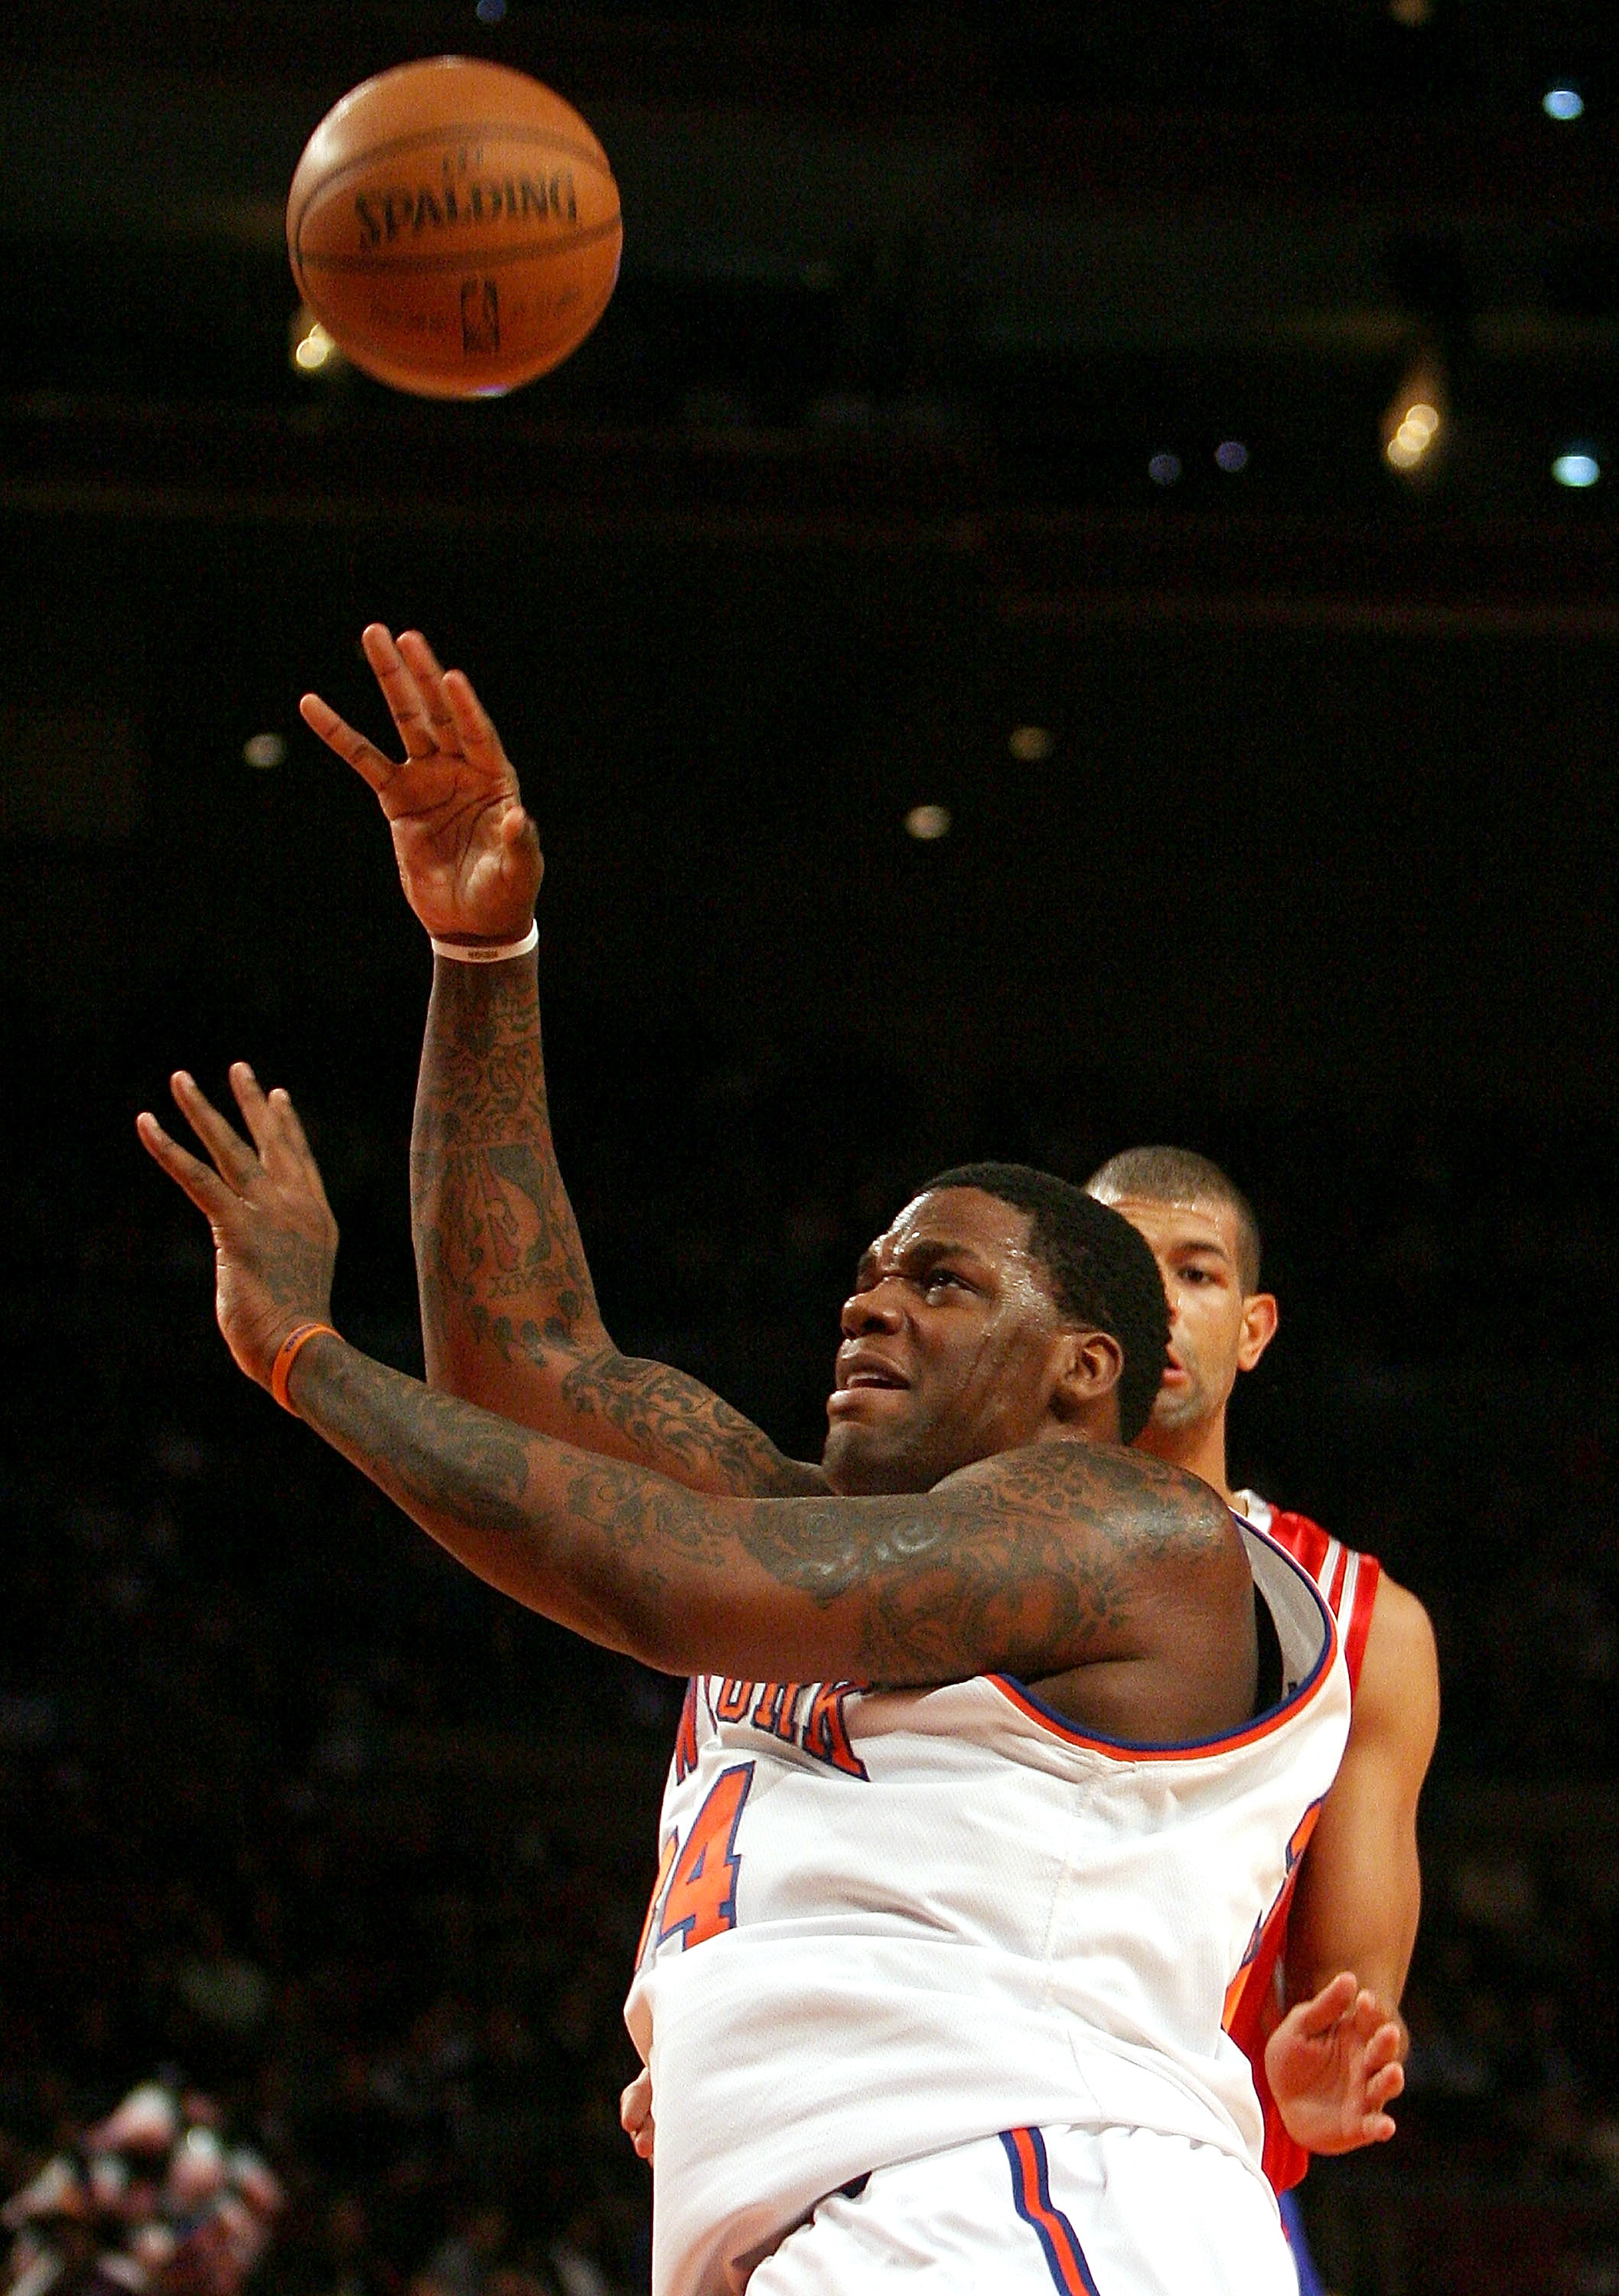 NEW YORK - JANUARY 09: Eddie Curry #34 of the New York Knicks shoots the ball as he falls to the ground against the Houston Rockets on January 9, 2008 at Madison Square Garden in New York City. NOTE TO USER: User expressly acknowledges and agrees that, by